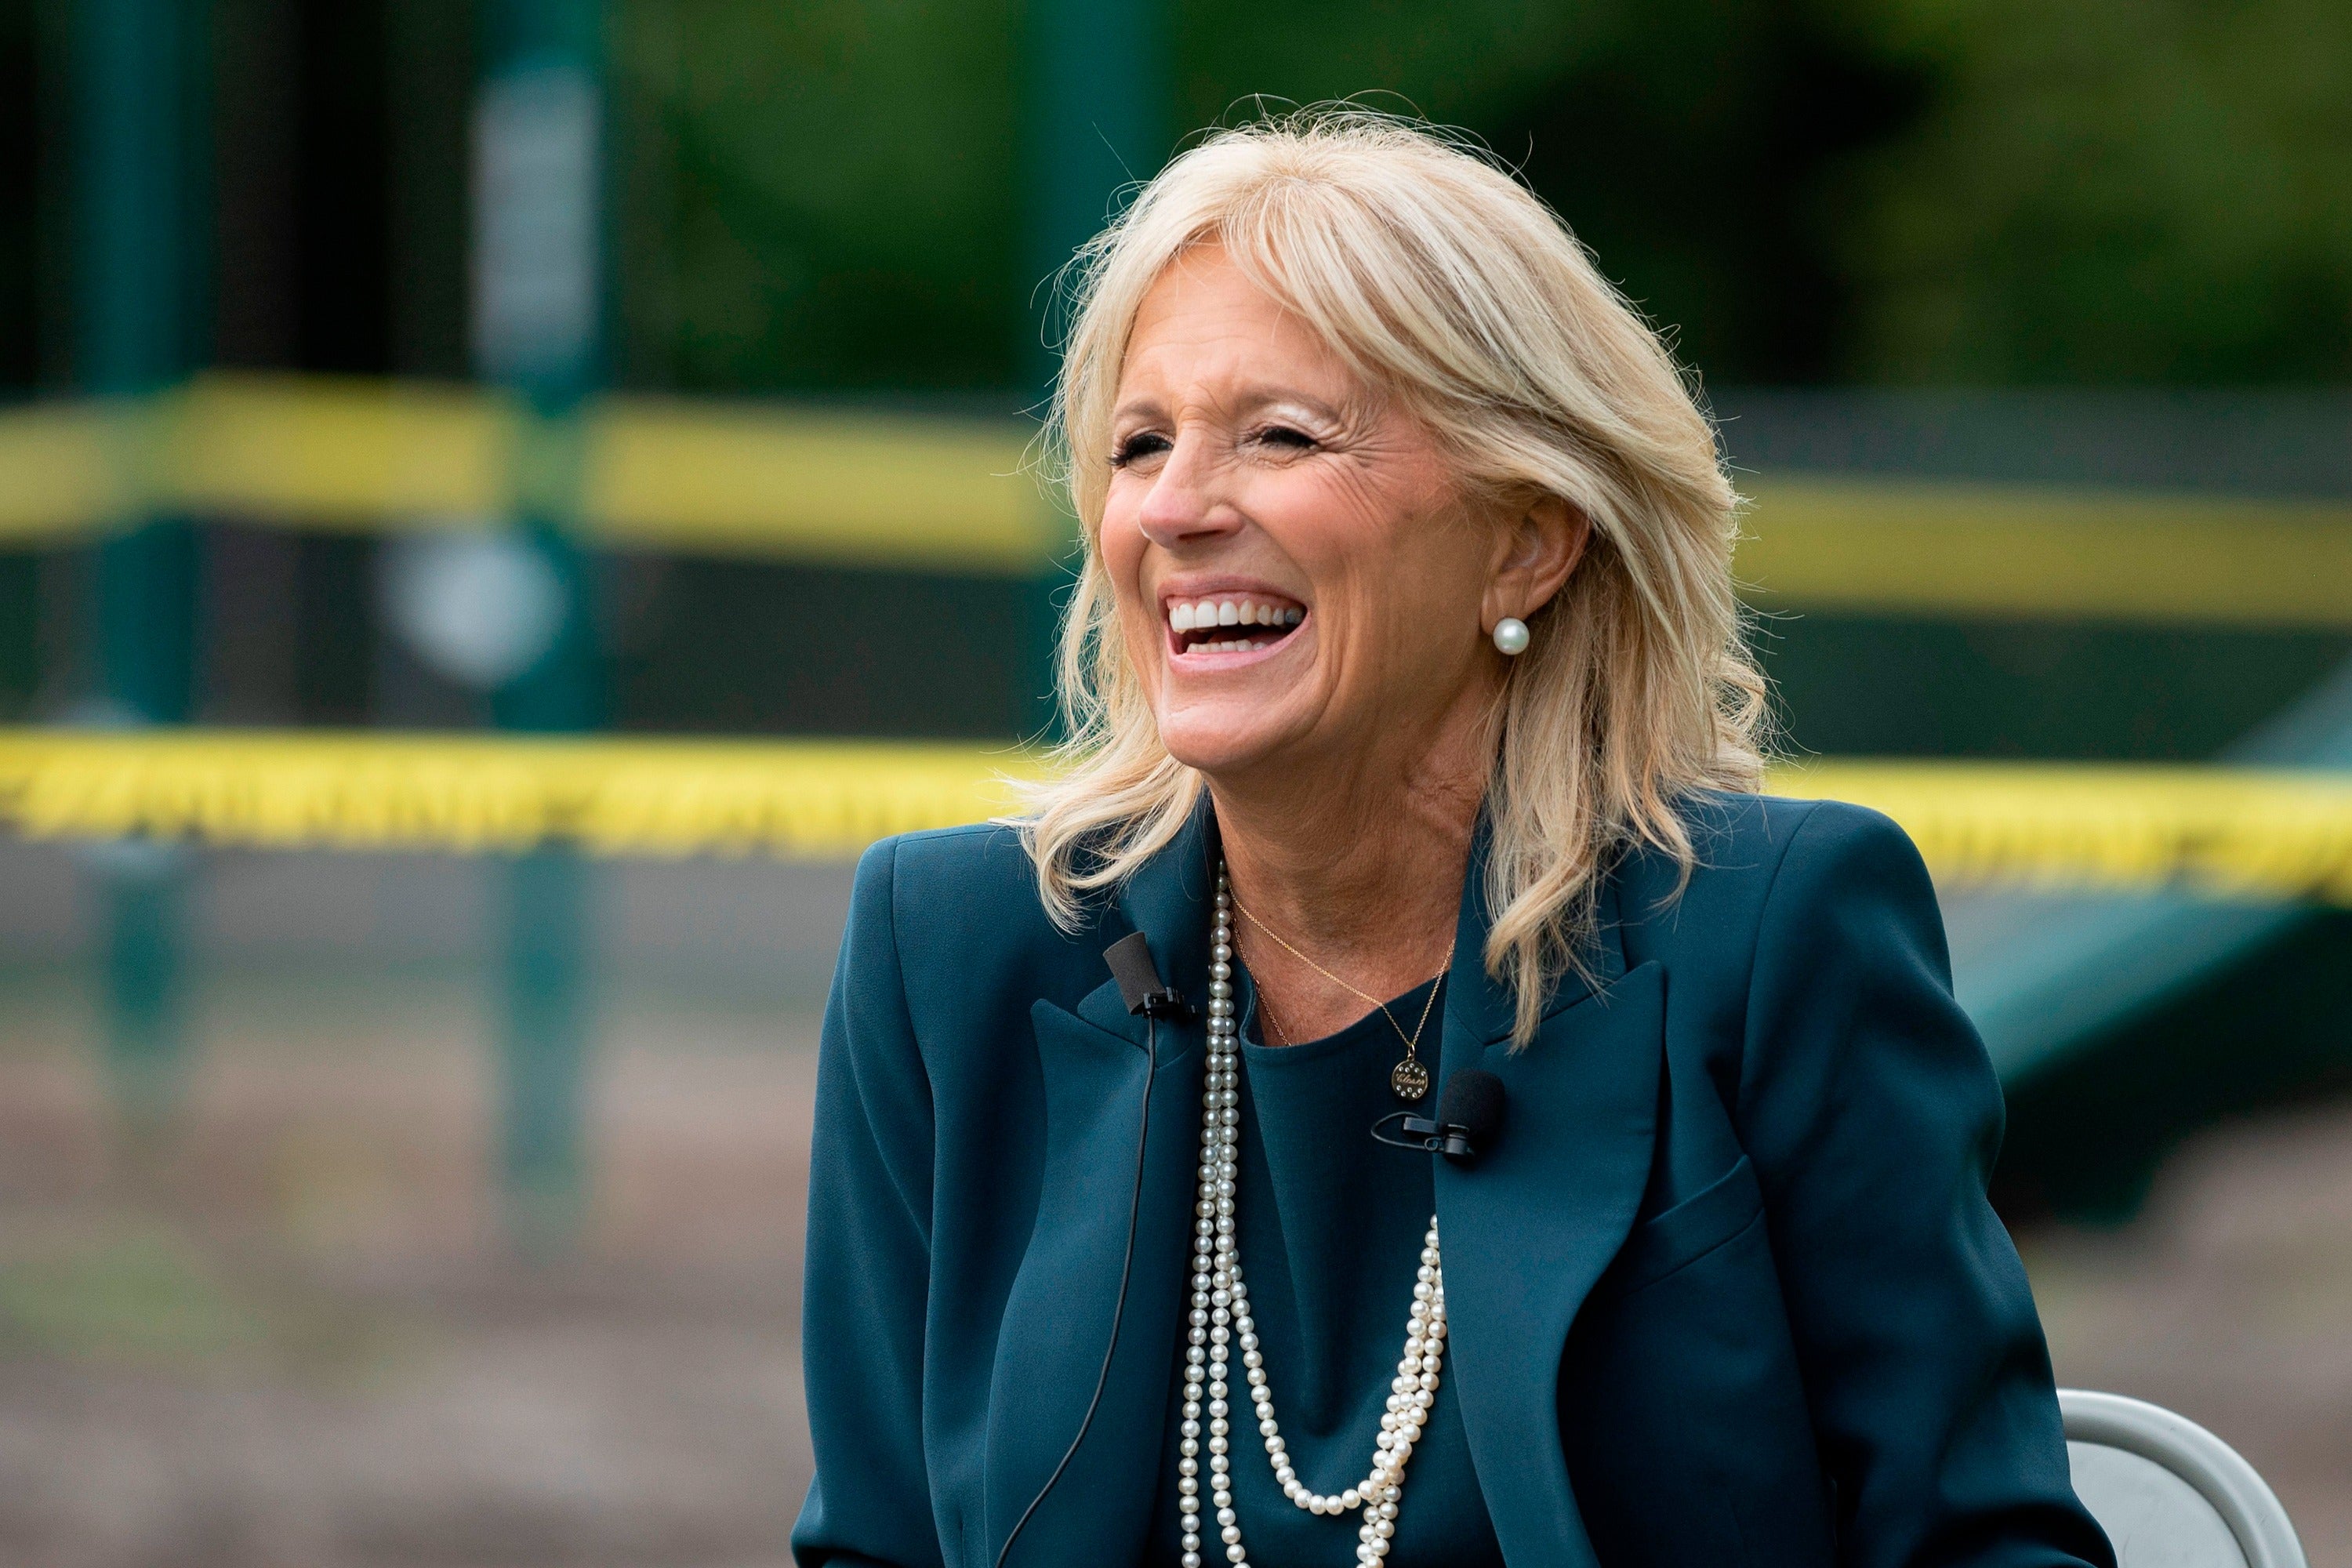 Dr Jill Biden’s PhD is not worth the paper it is written on, according to a US opinion writer